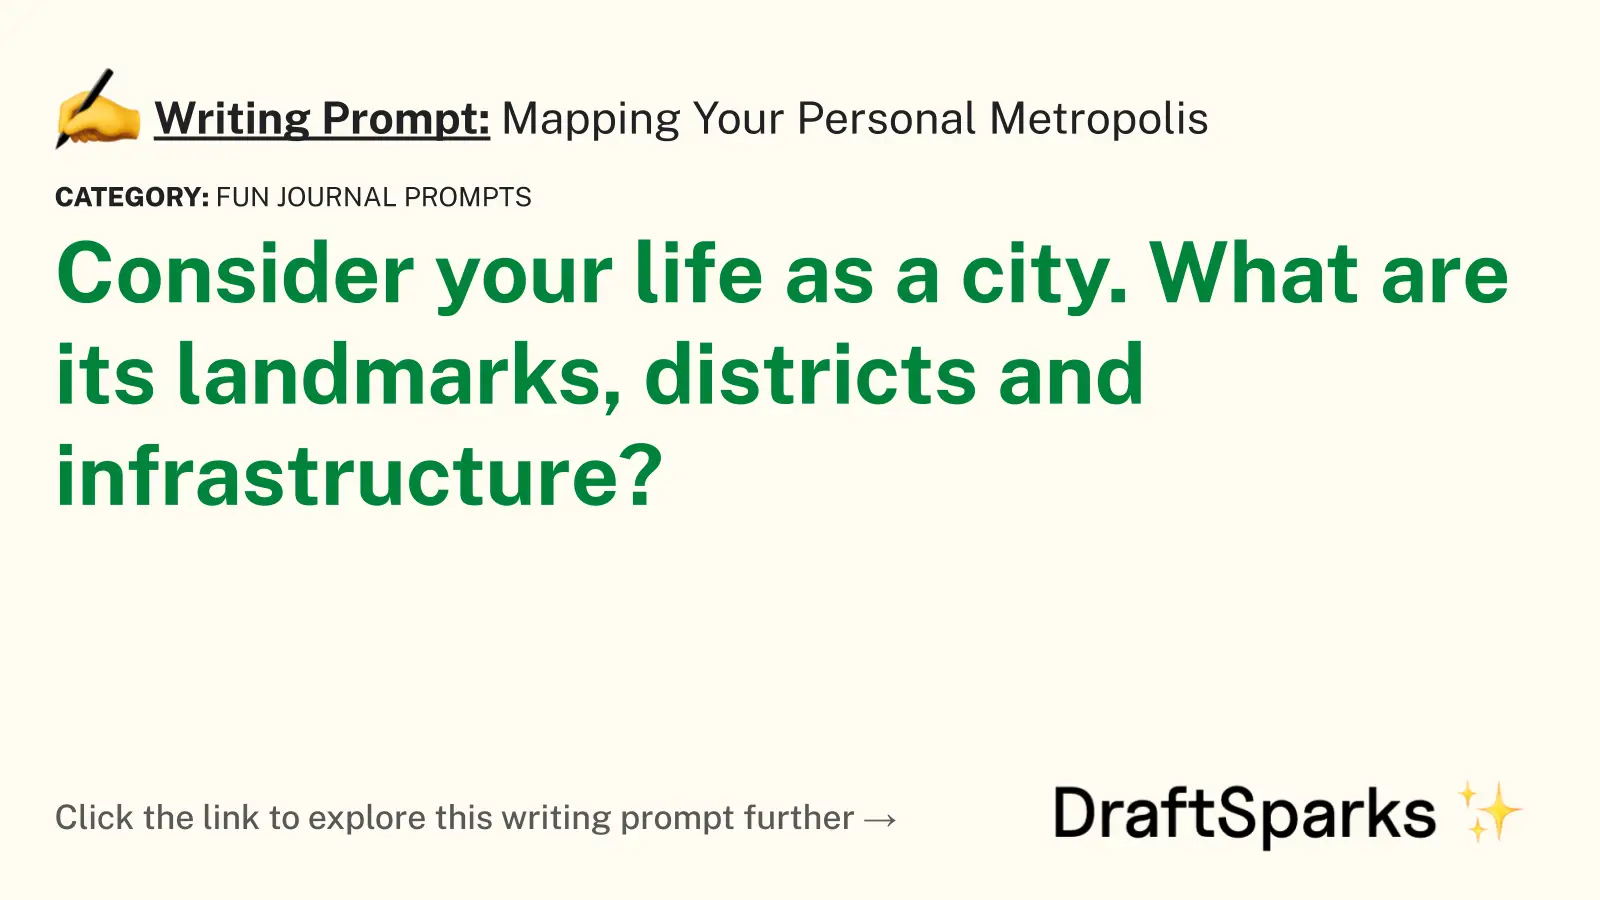 Mapping Your Personal Metropolis